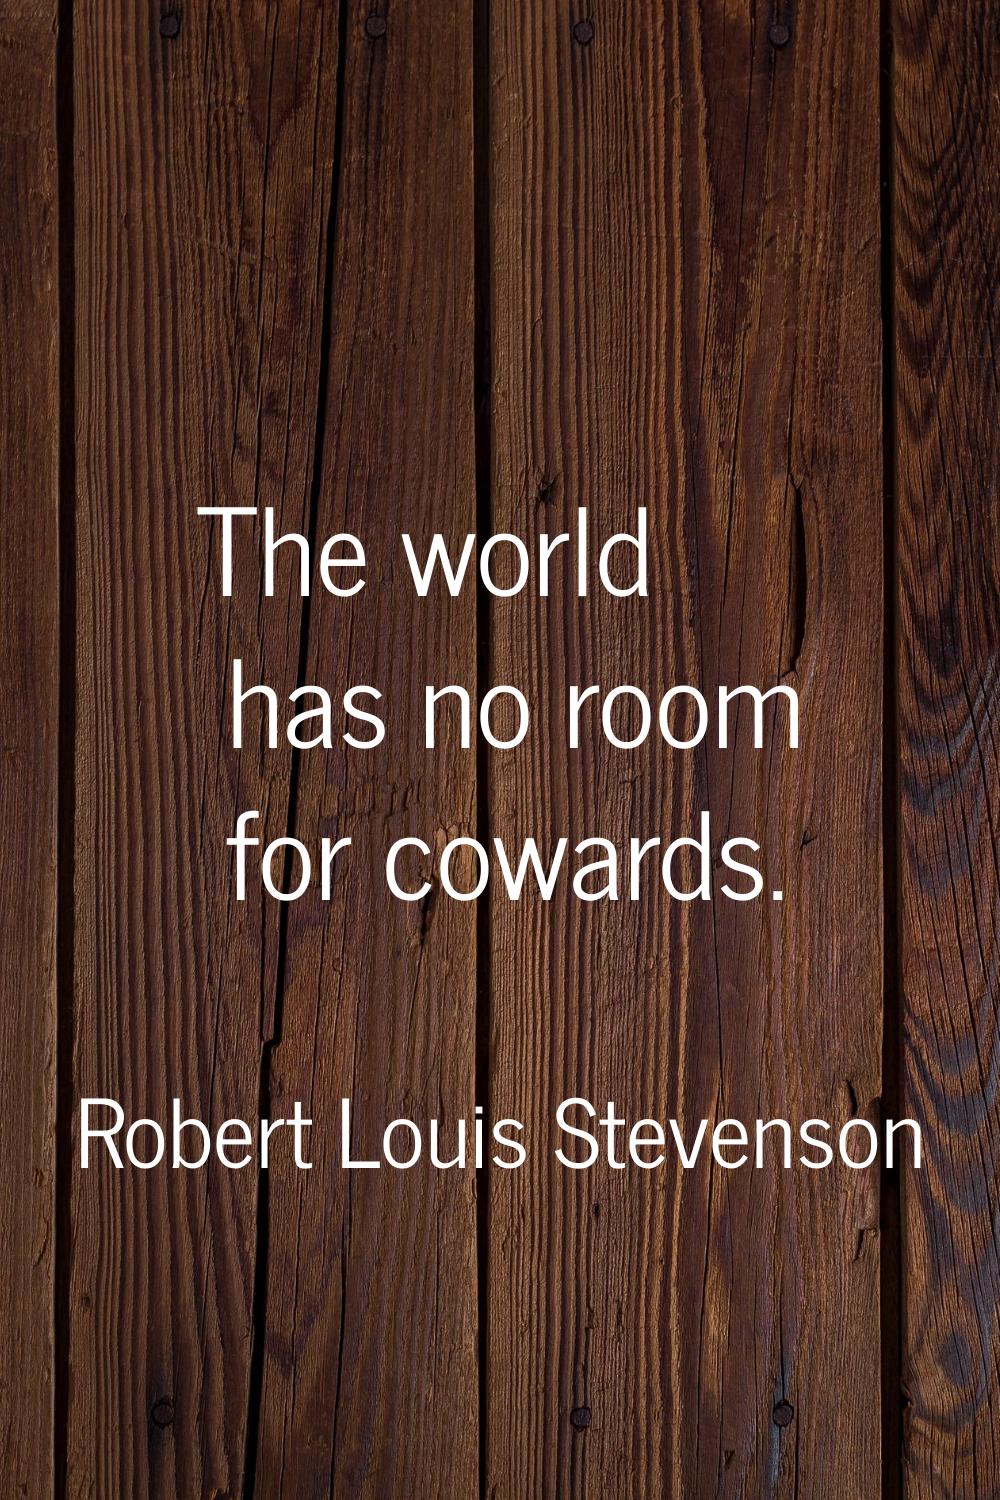 The world has no room for cowards.